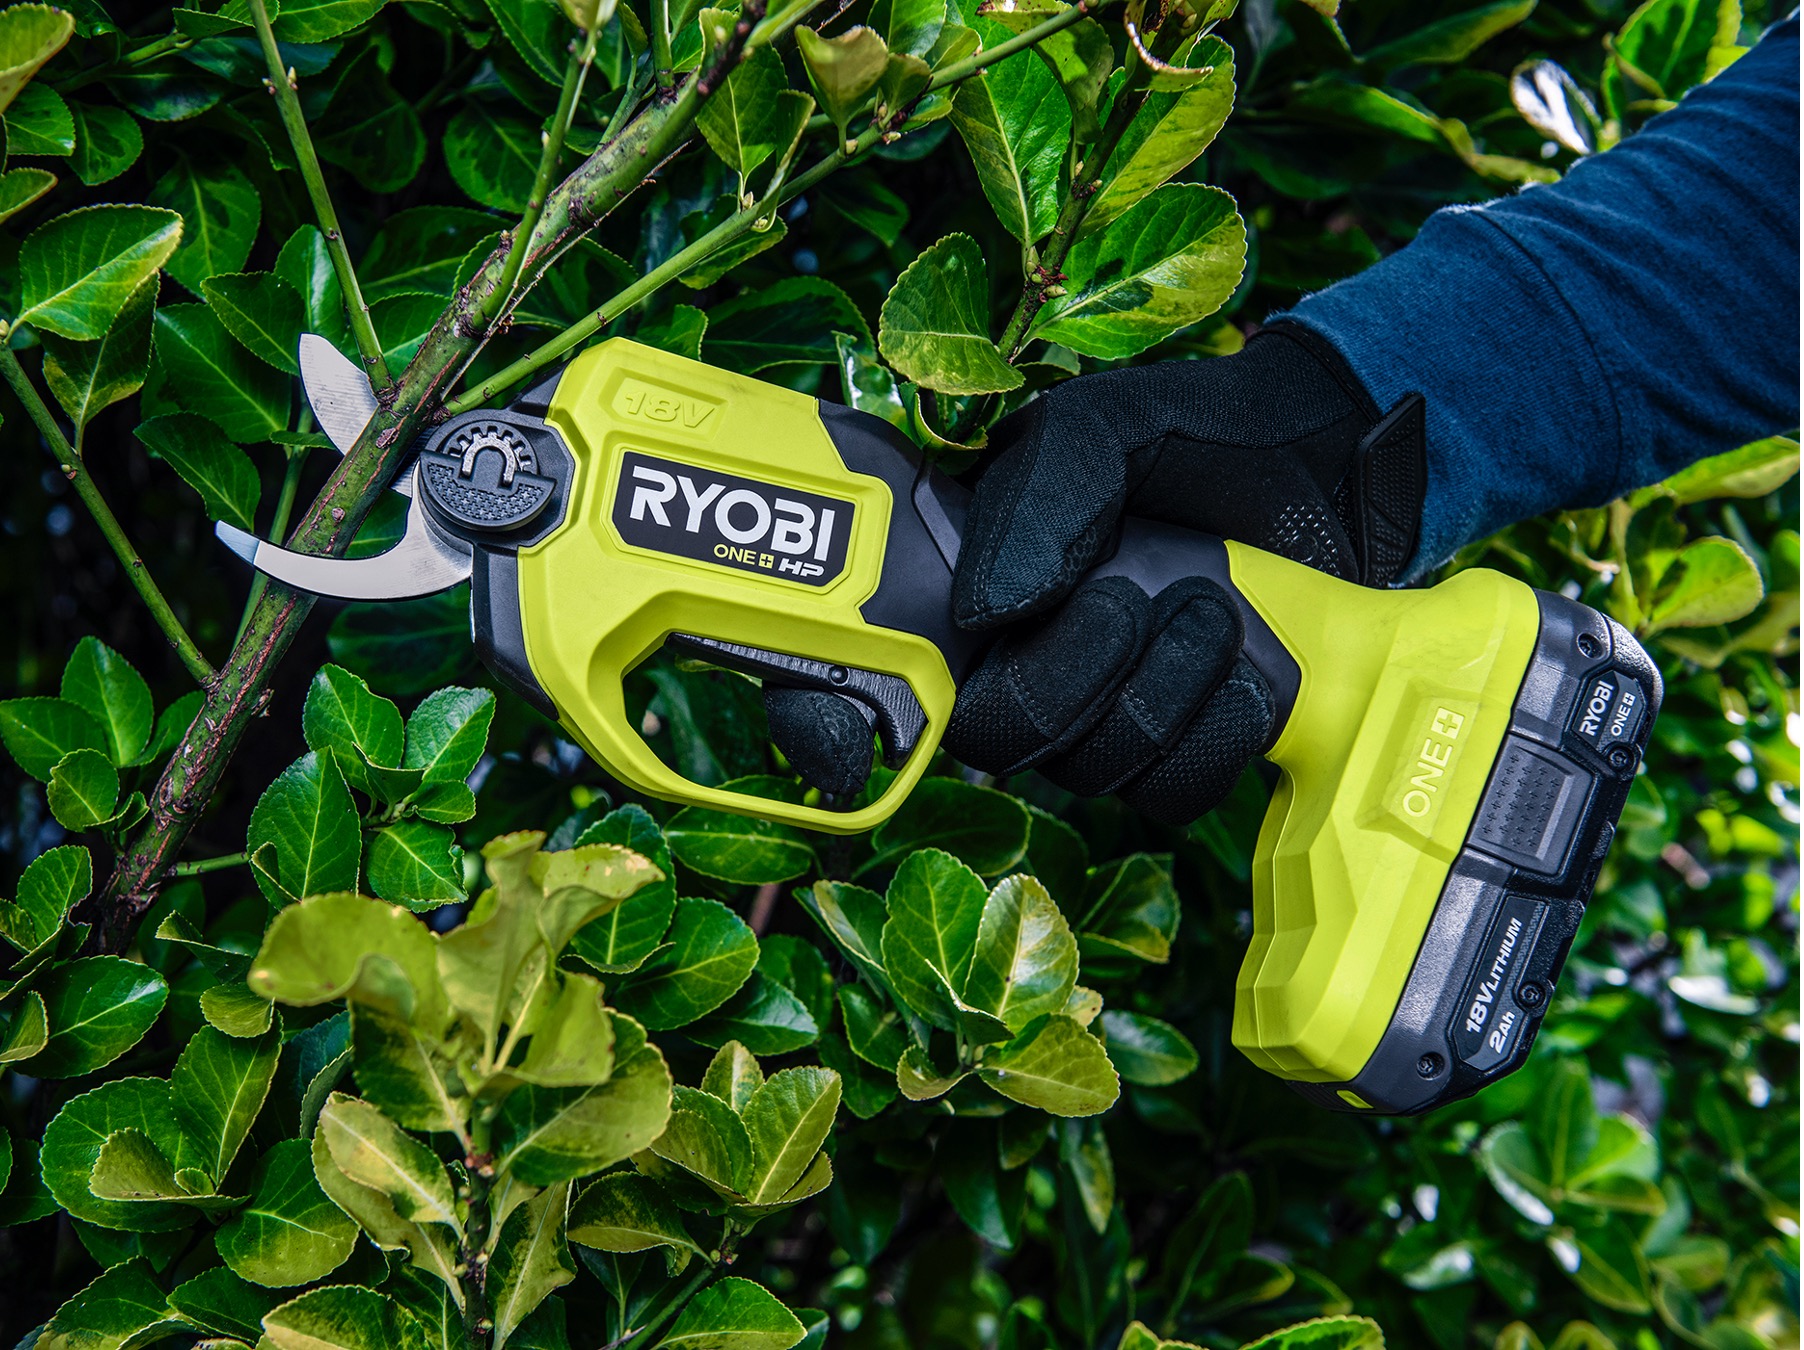 Replaces Manual Pruning With the Pull of a Trigger